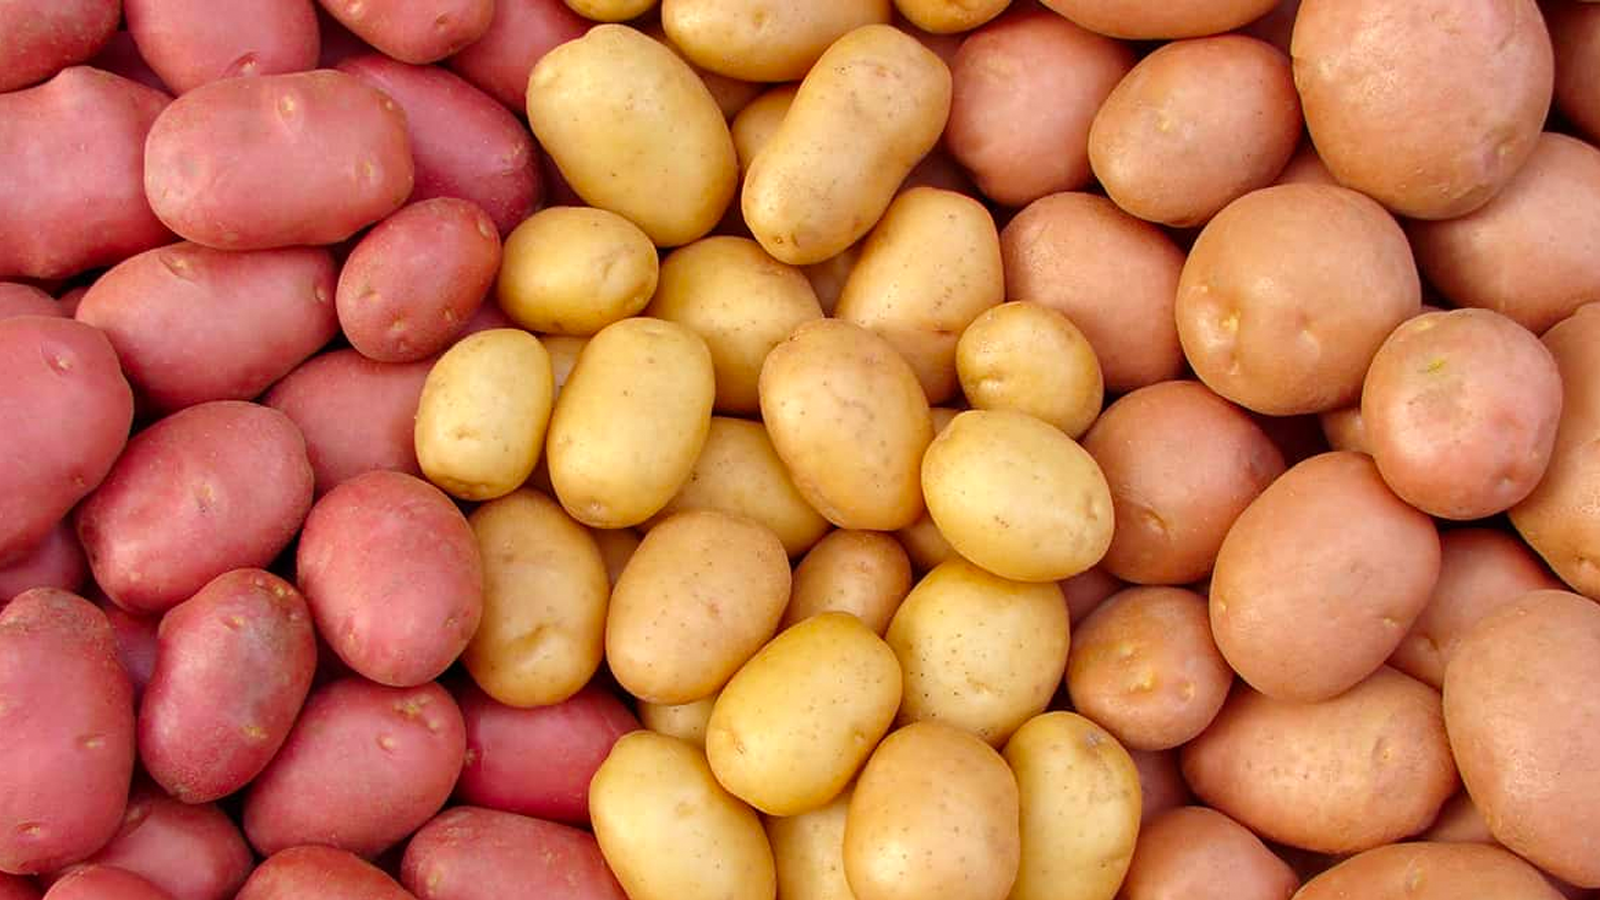 The picture shows a pile of potatoes in different colours and varieties.